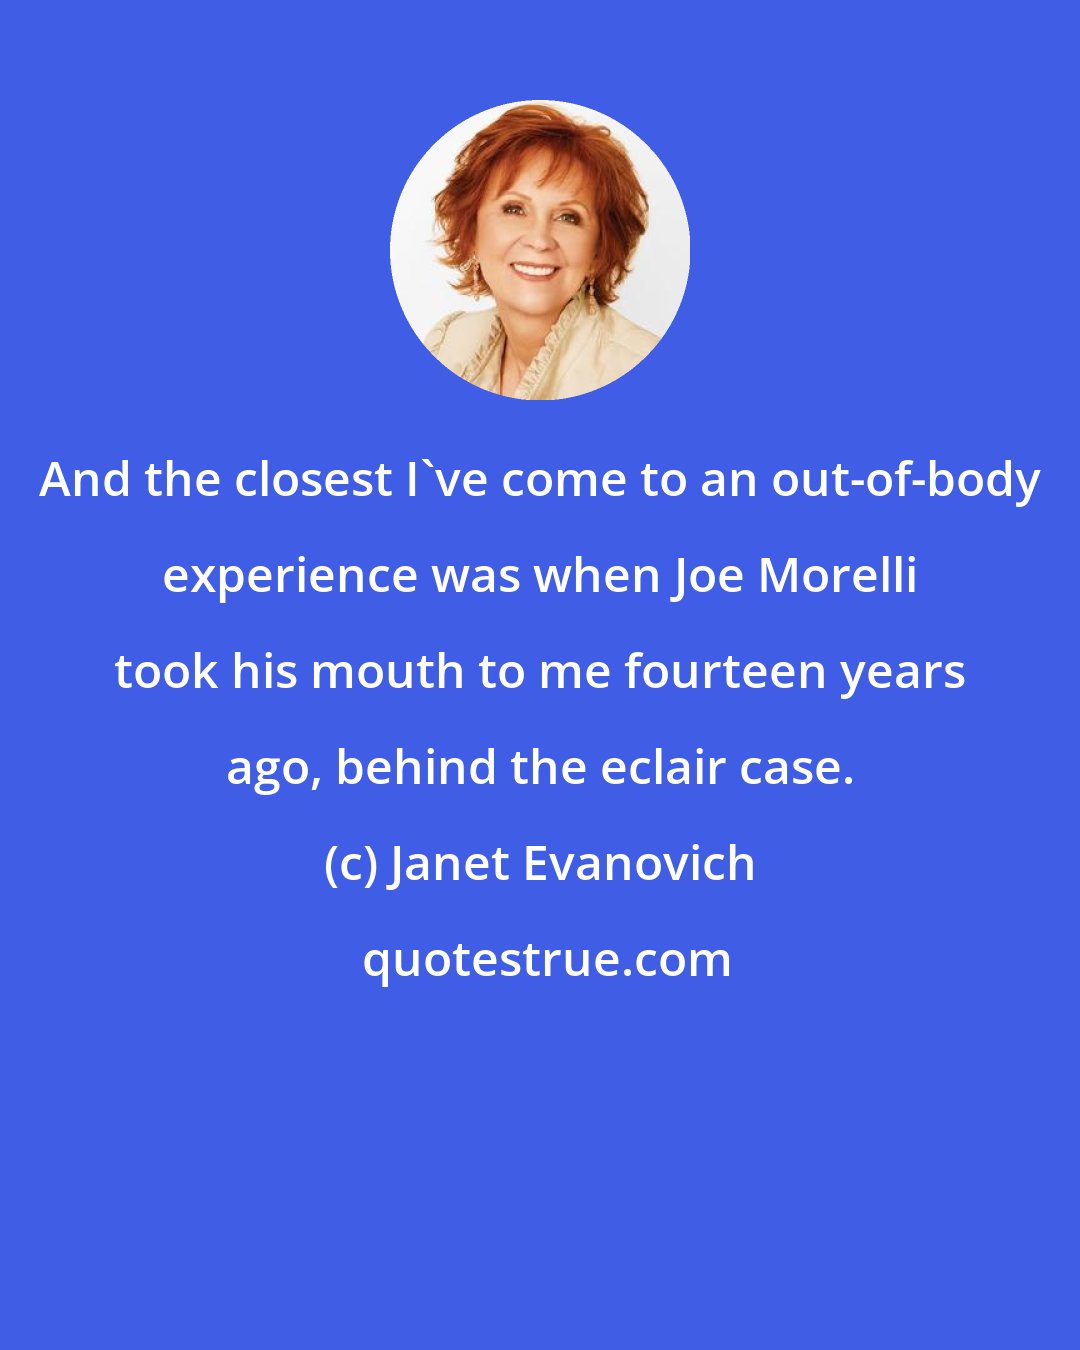 Janet Evanovich: And the closest I've come to an out-of-body experience was when Joe Morelli took his mouth to me fourteen years ago, behind the eclair case.